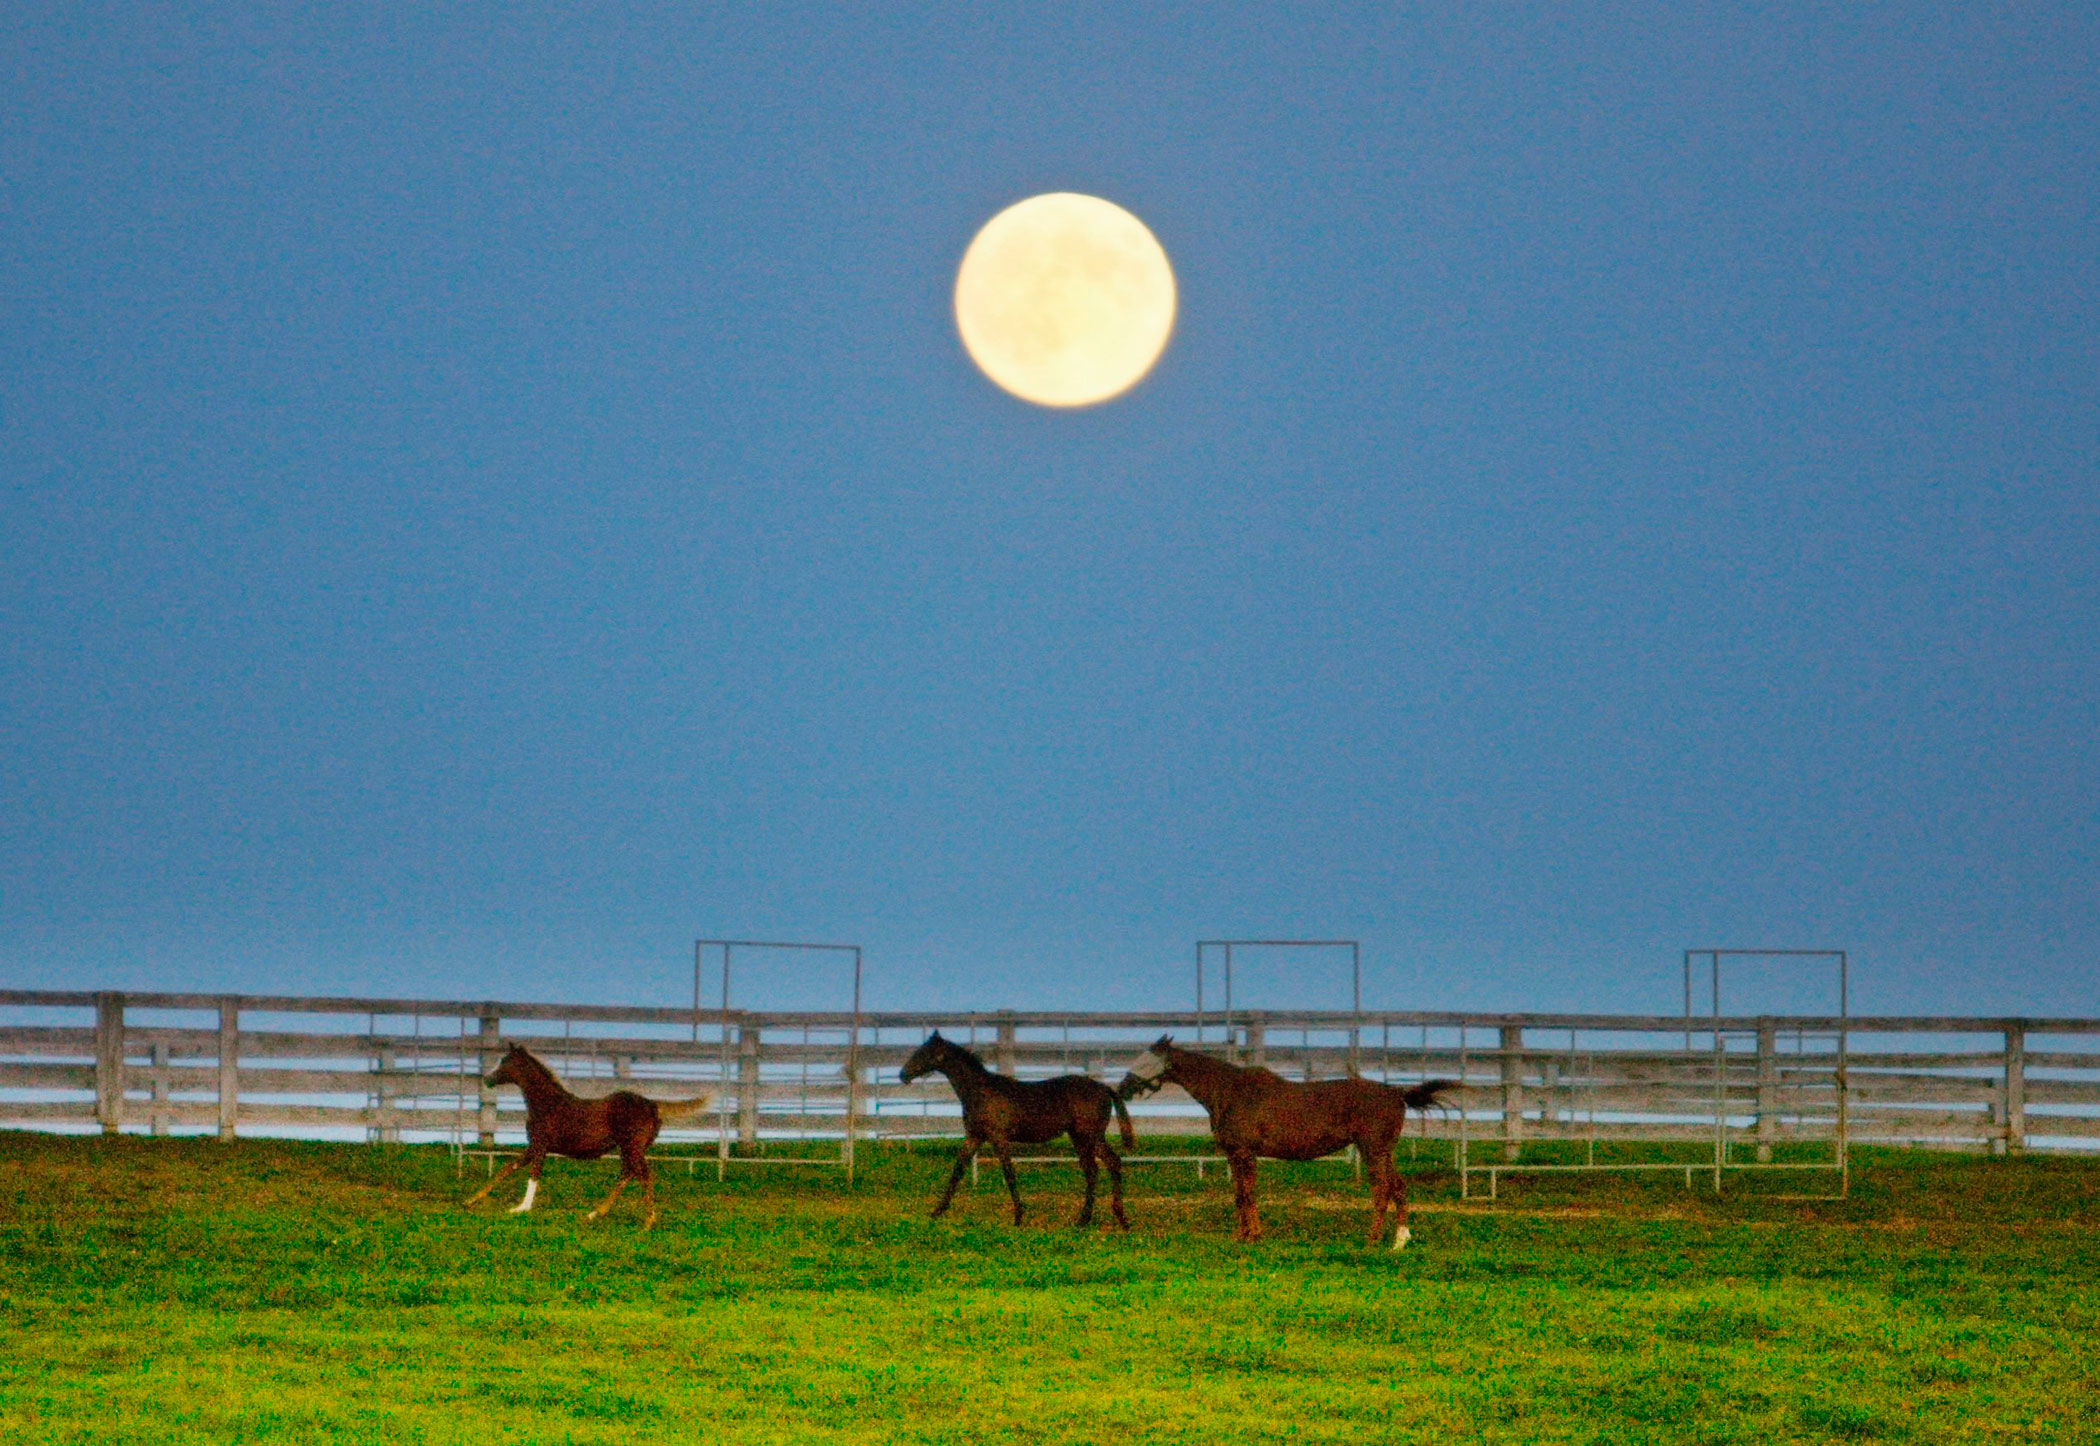 The harvest supermoon rises over a horse pasture in Halton Hills, Ontario on Sept. 8, 2014.